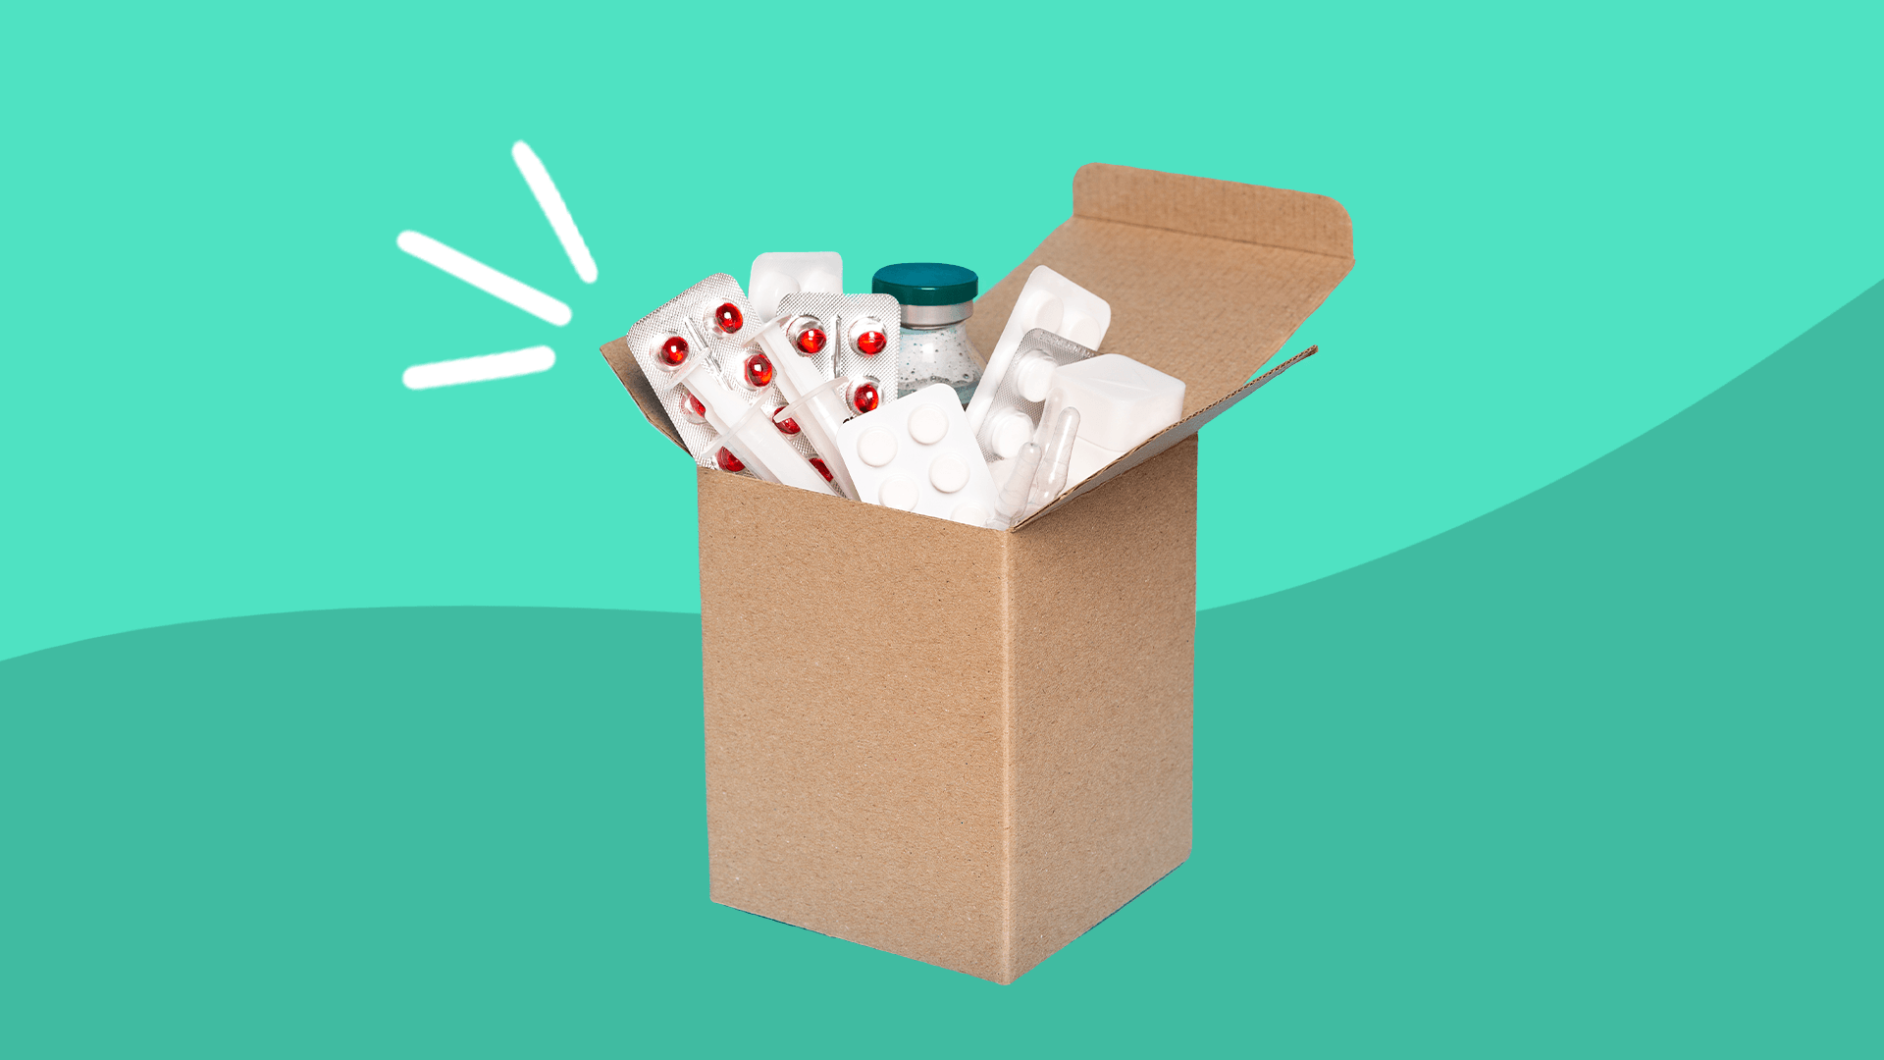 Delivery box with medications inside: Learn what pharmacy delivery is (and what it's not)